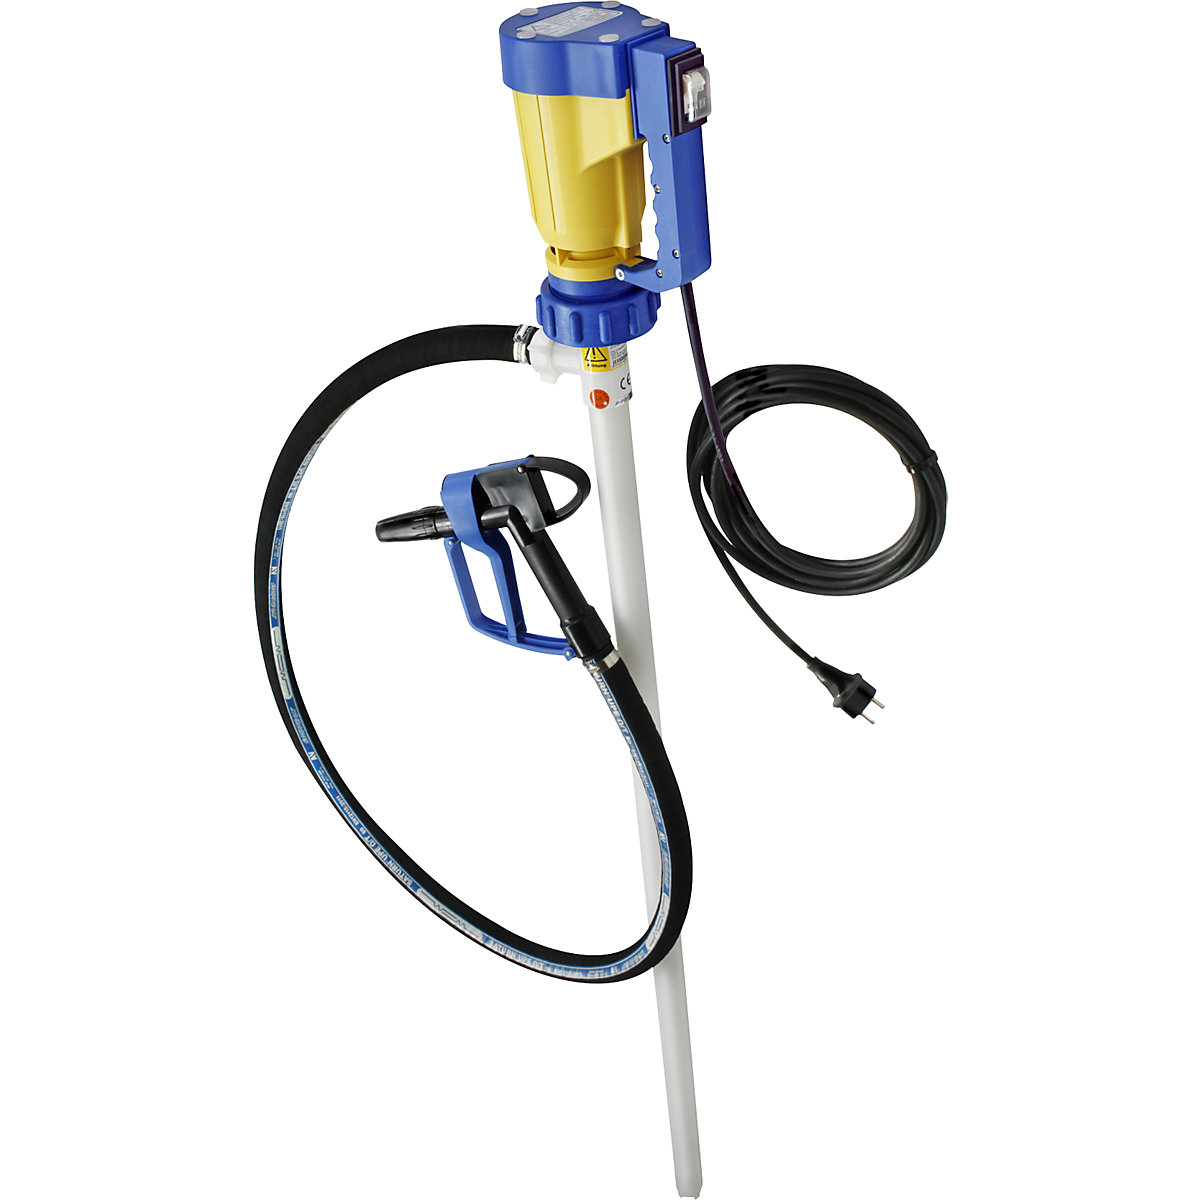 Electric canister pump set – Jessberger: for highly aggressive